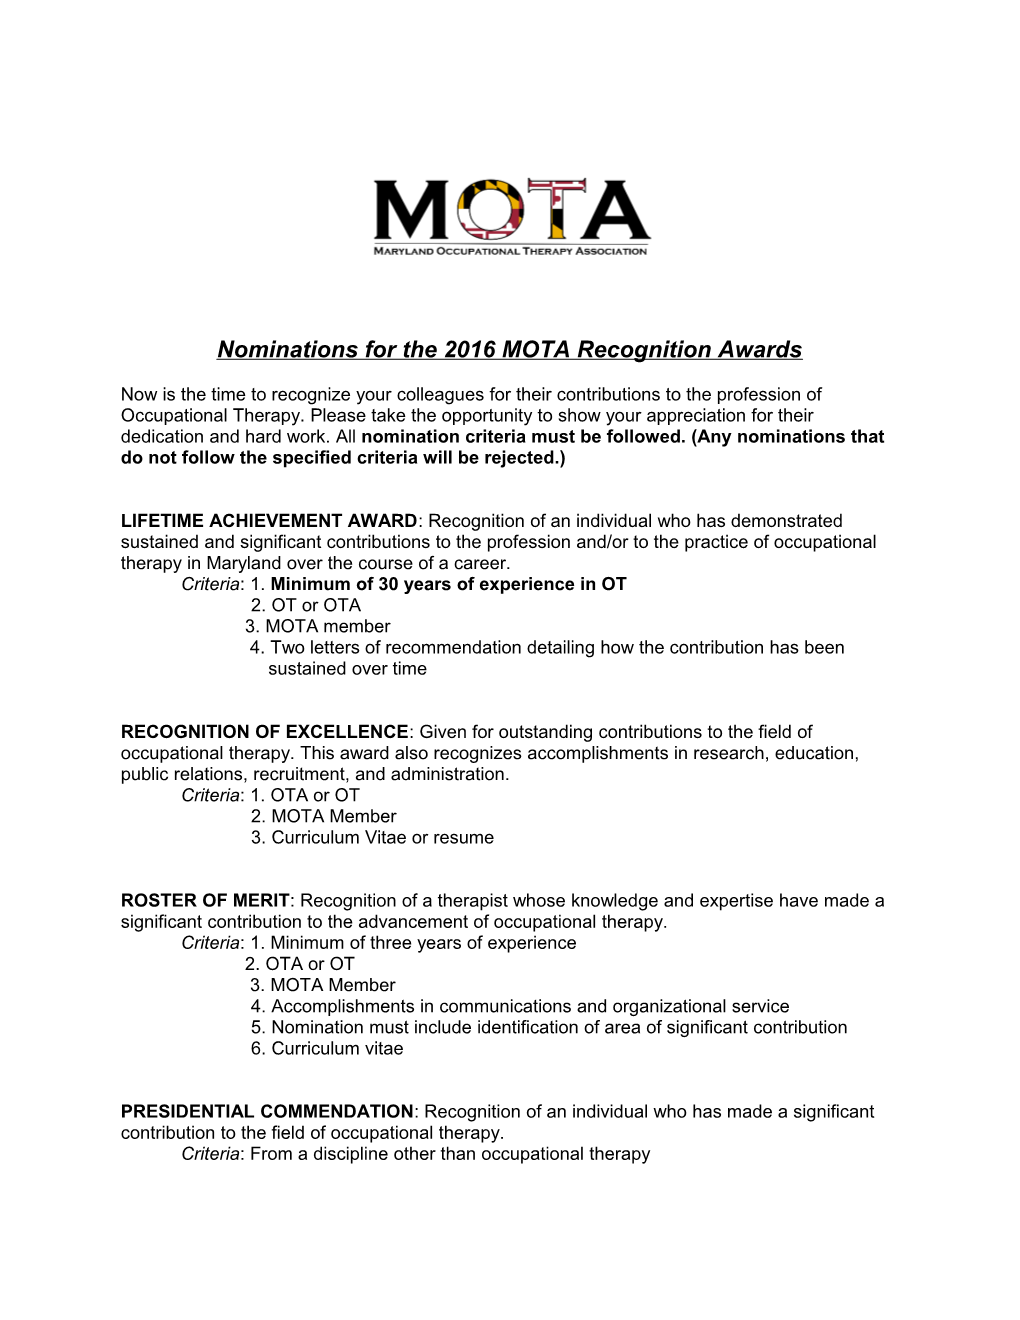 Nominations for the 2016 MOTA Recognition Awards